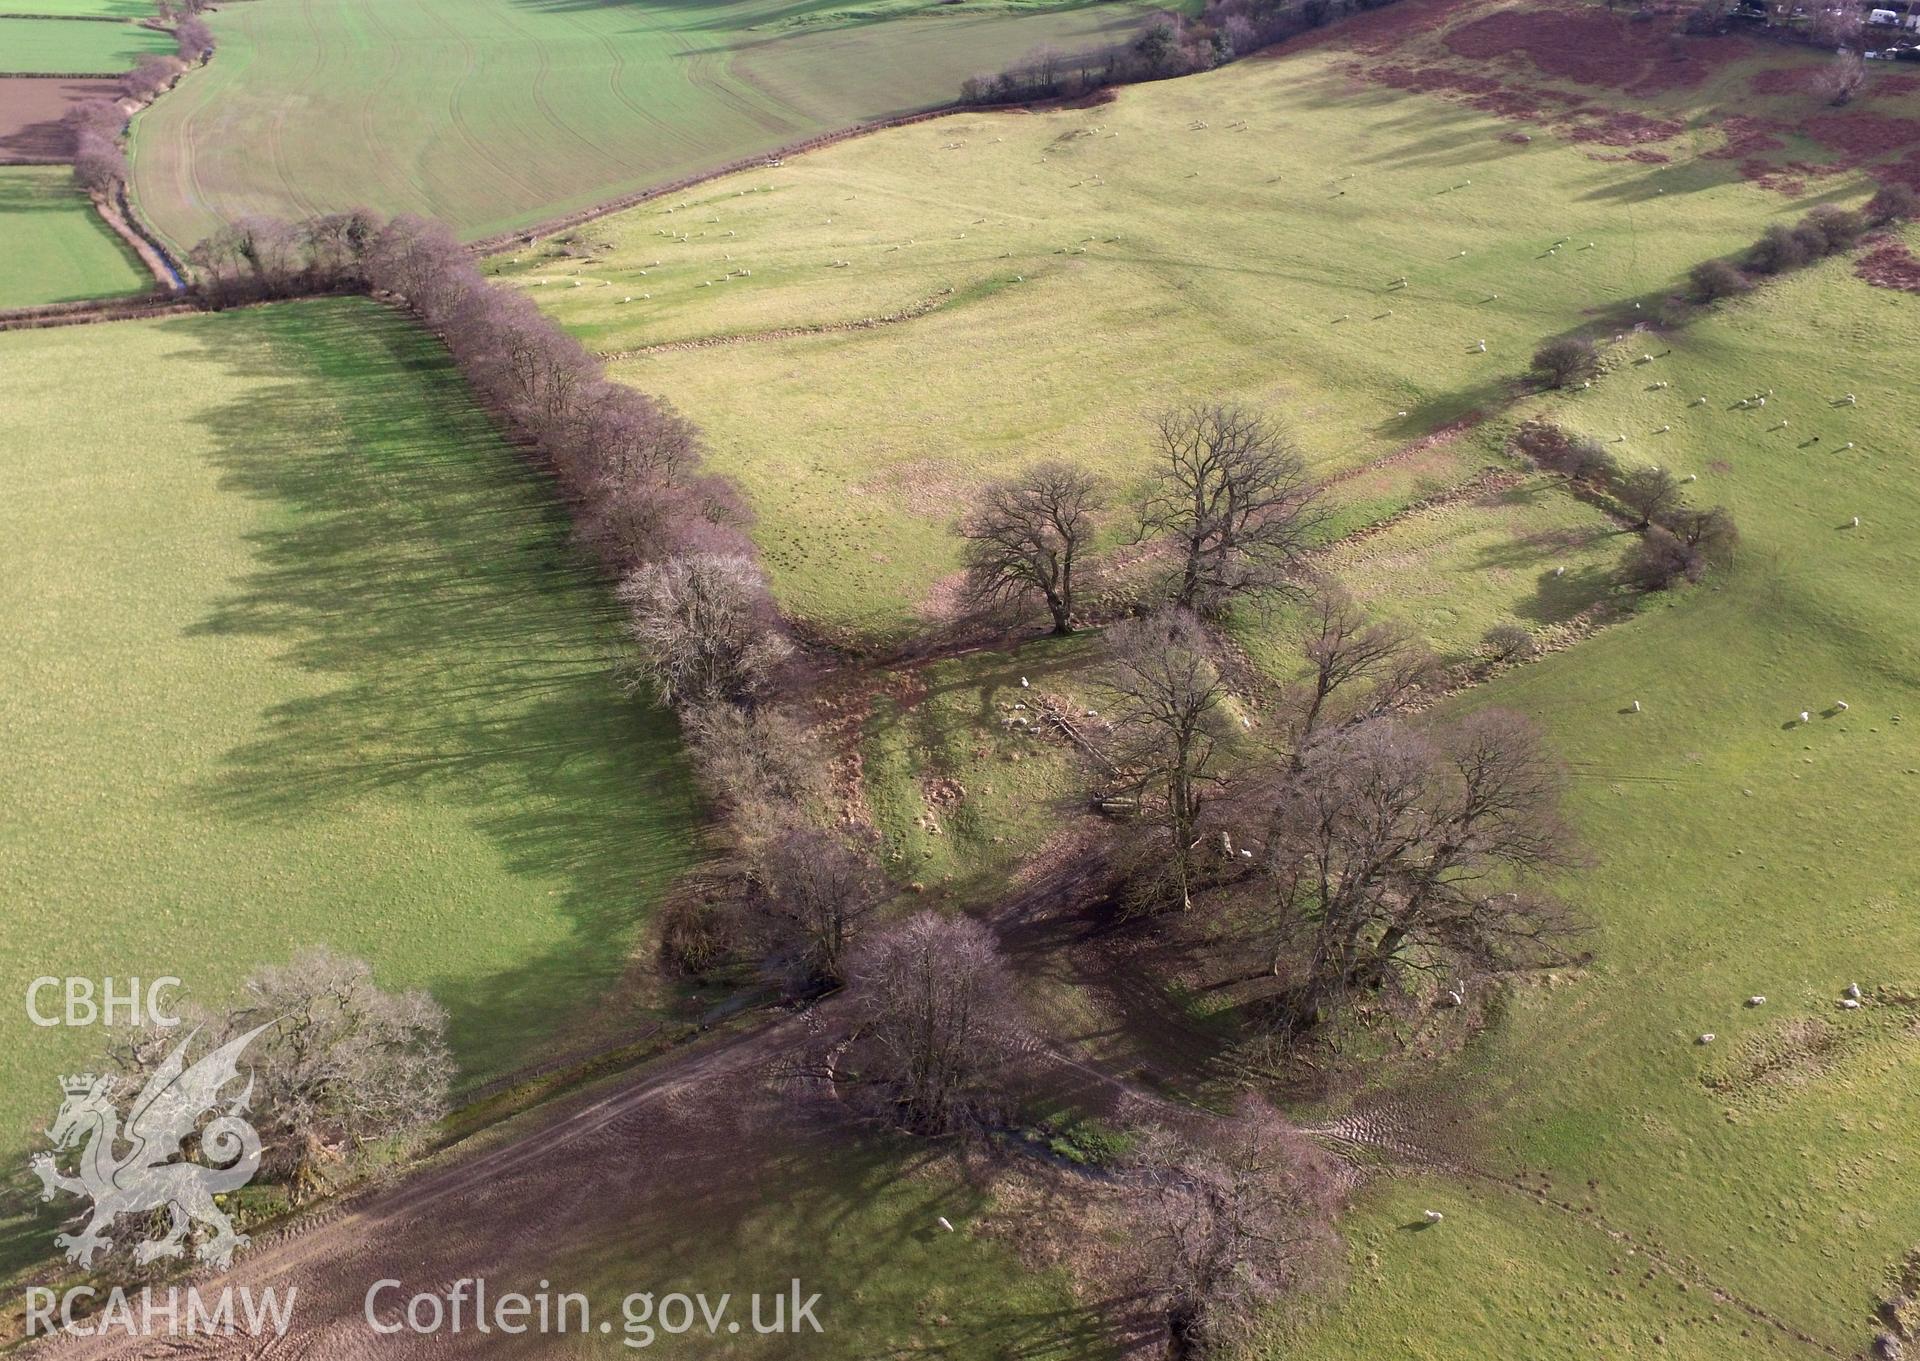 Aerial view of Castell Nimble, Old Radnor. Colour photograph taken by Paul R. Davis on 2nd February 2018.